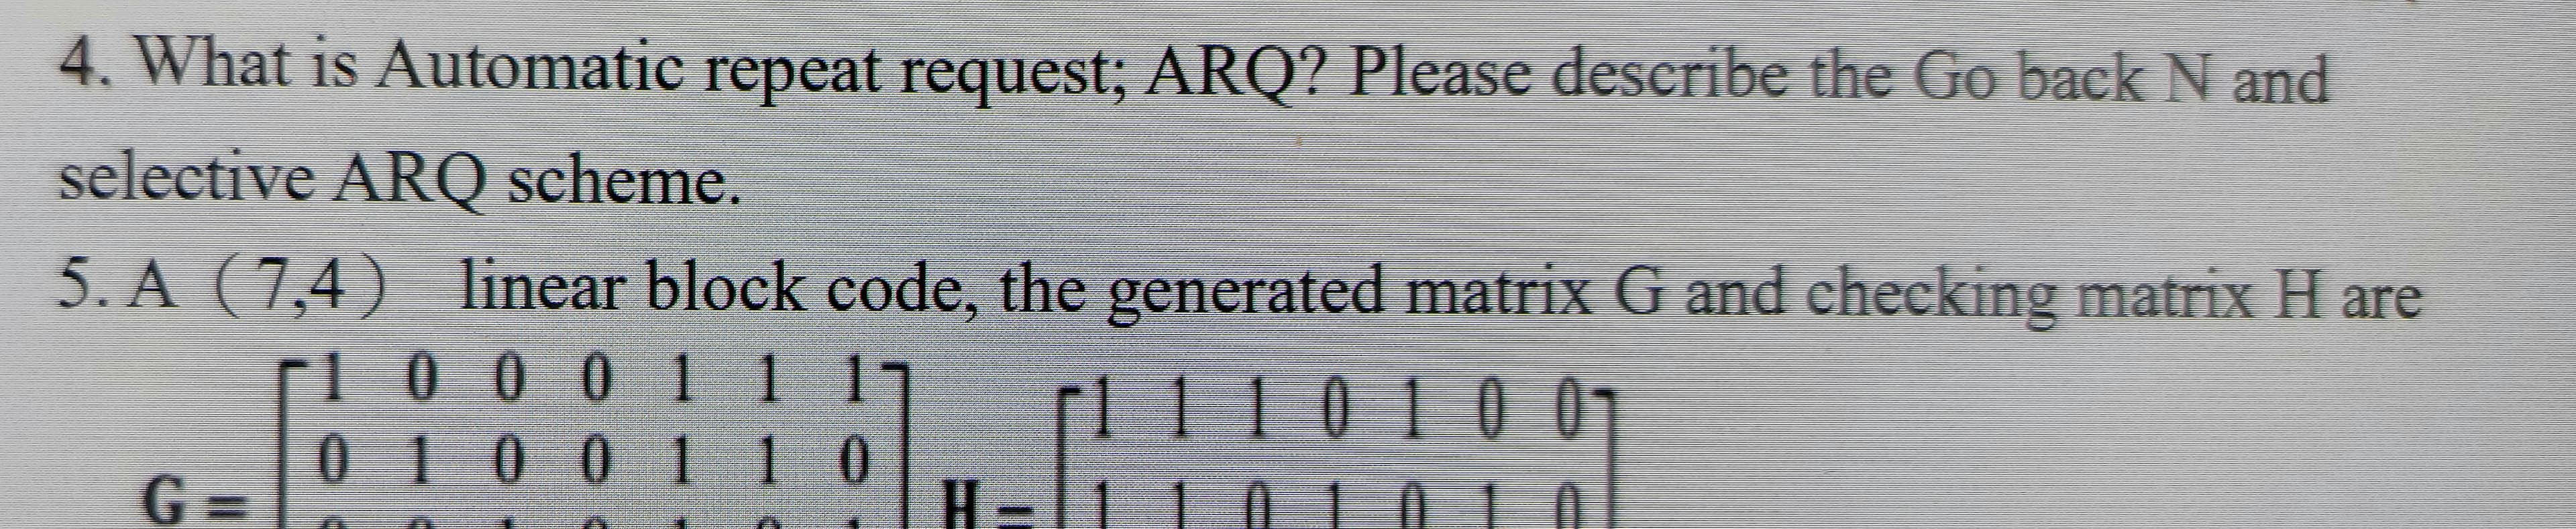 4. What is Automatic repeat request; ARQ? Please describe the Go back N and
selective ARQ scheme.
5. A (7,4) linear block code, the generated matrix G and checking matrix H are
omati
10 0 0 111
111010 0
0100110
G3=
